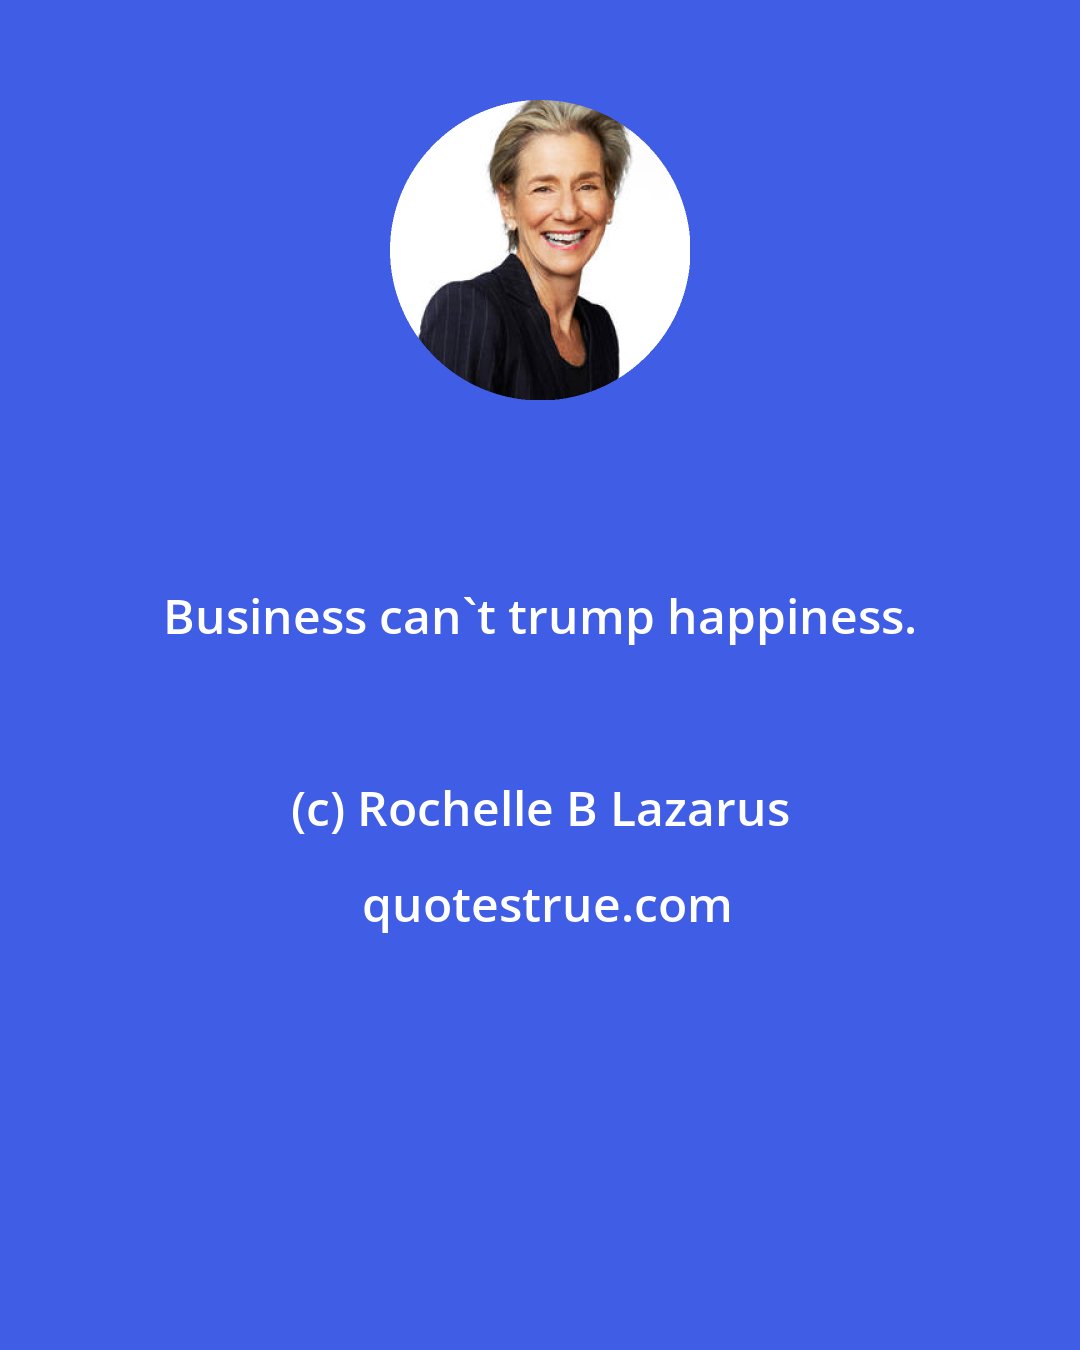 Rochelle B Lazarus: Business can't trump happiness.